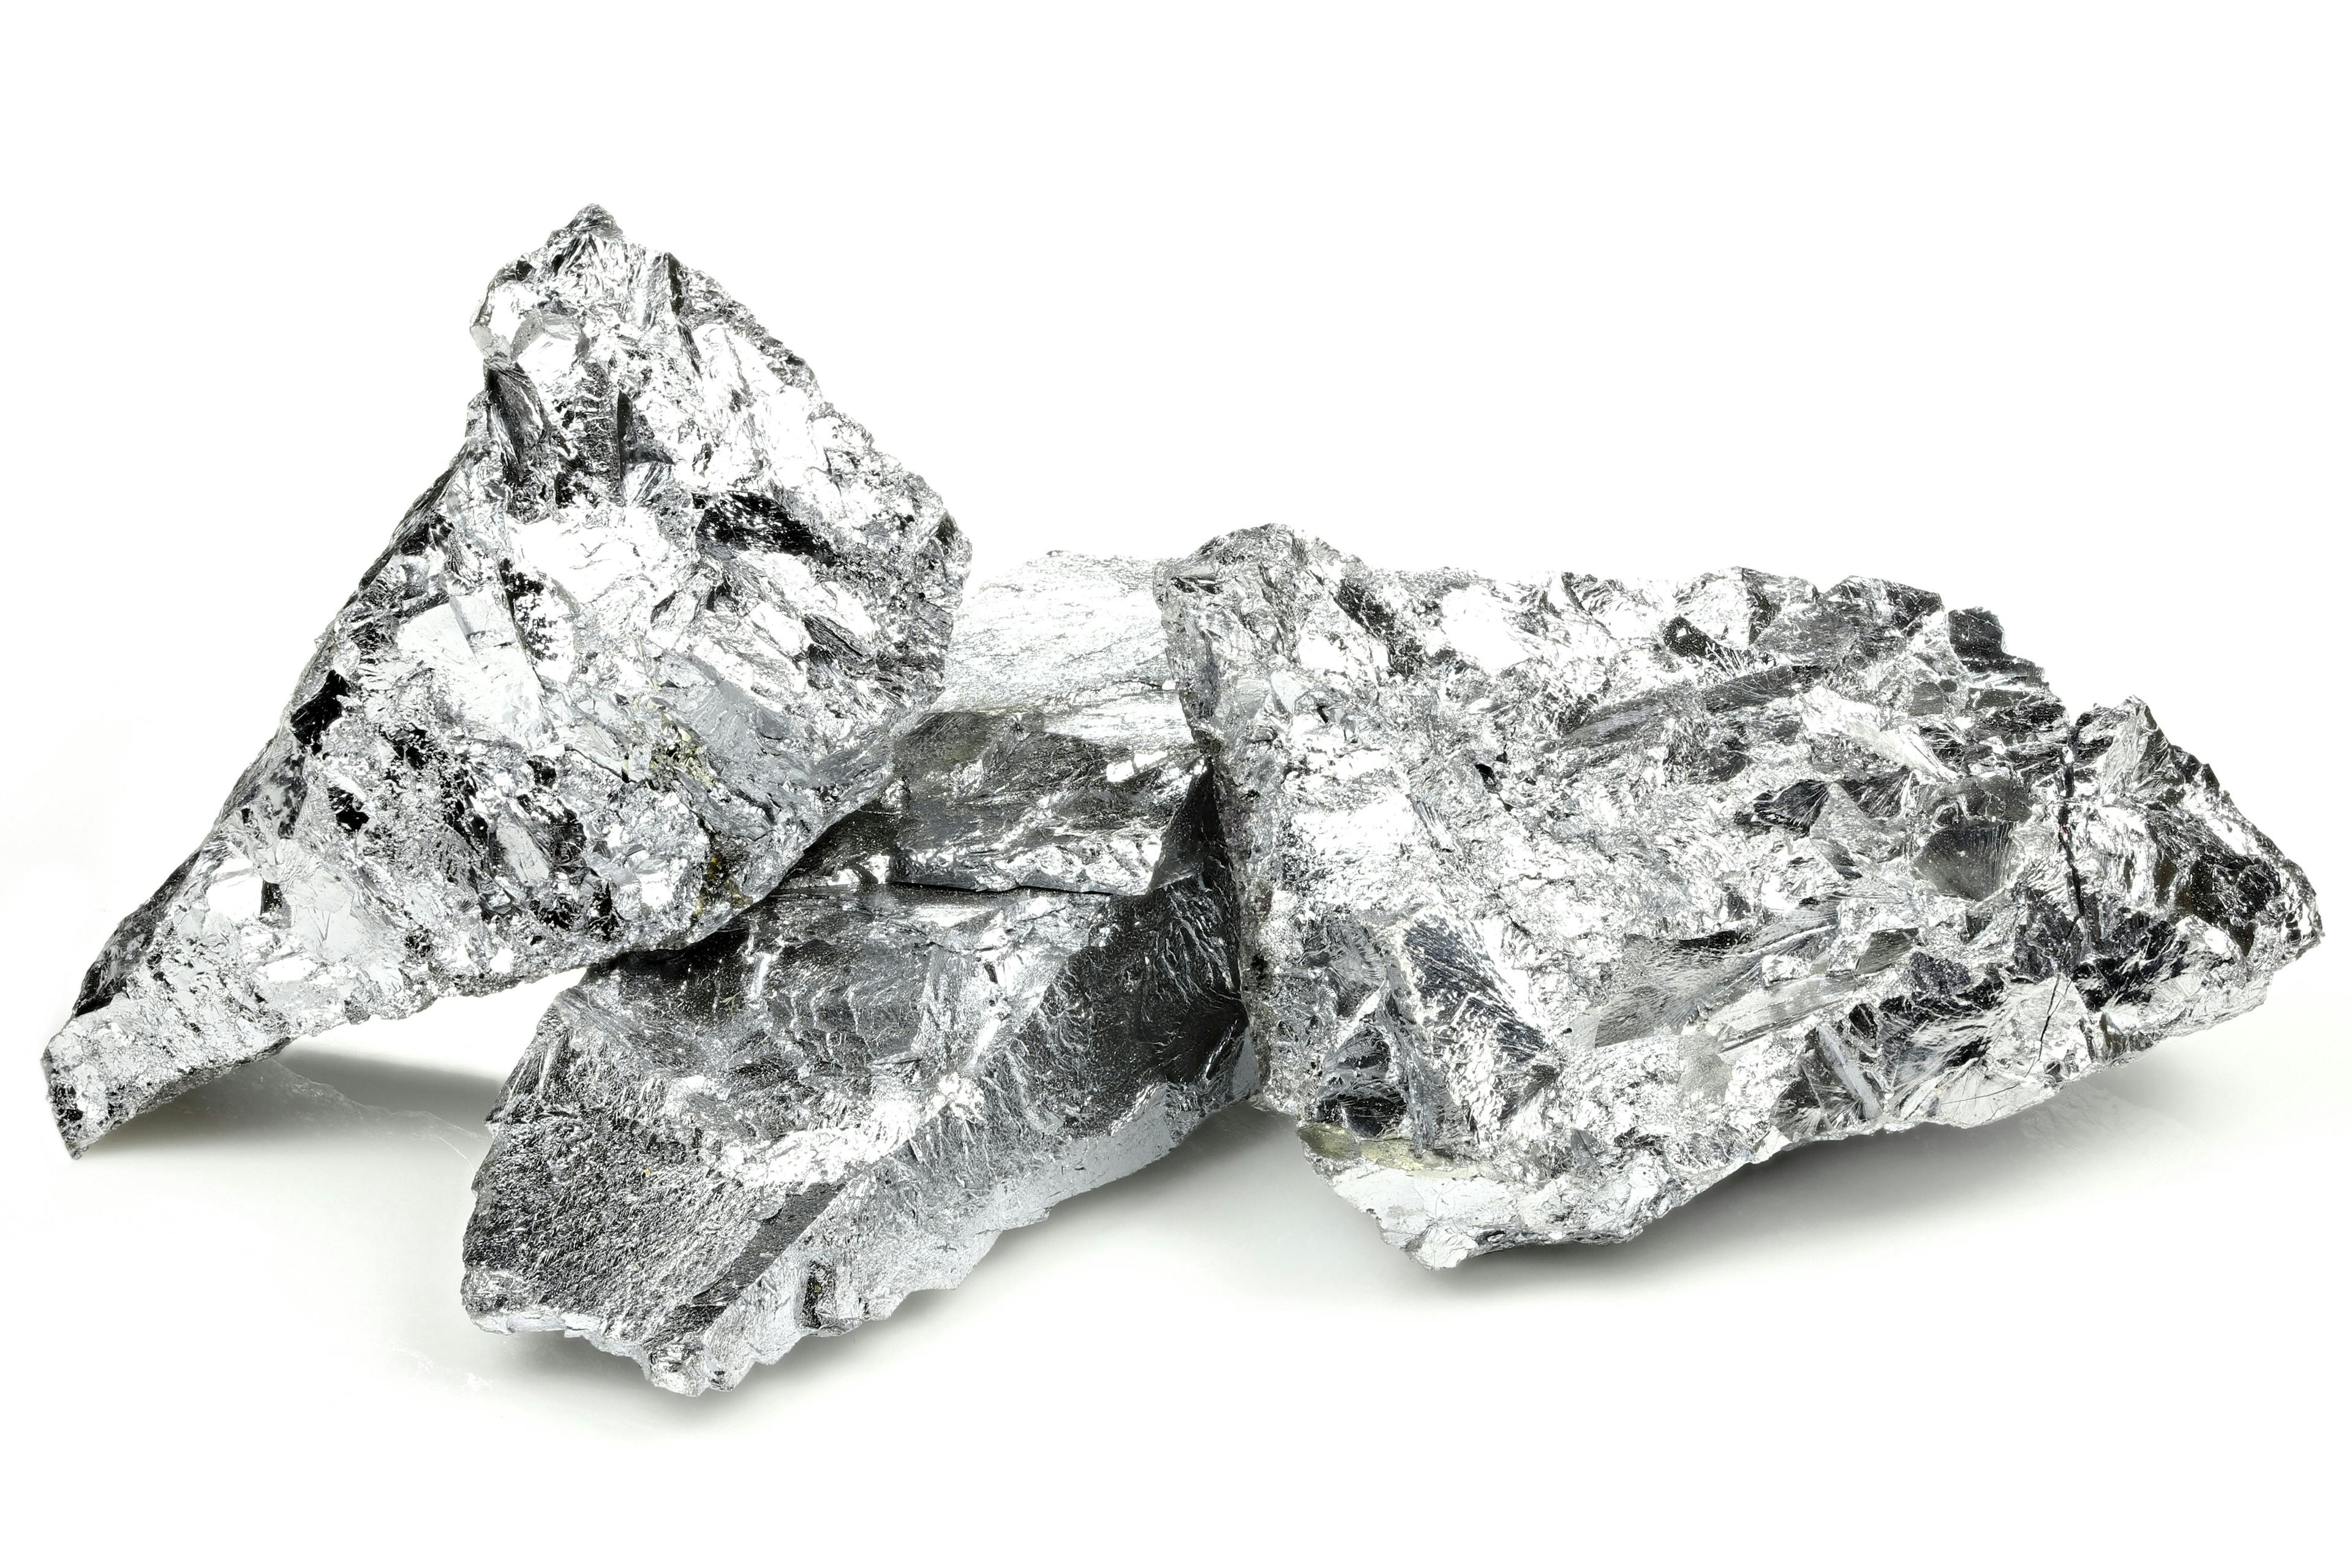 99.9% fine chromium isolated on white background | Image Credit: © Björn Wylezich - stock.adobe.com